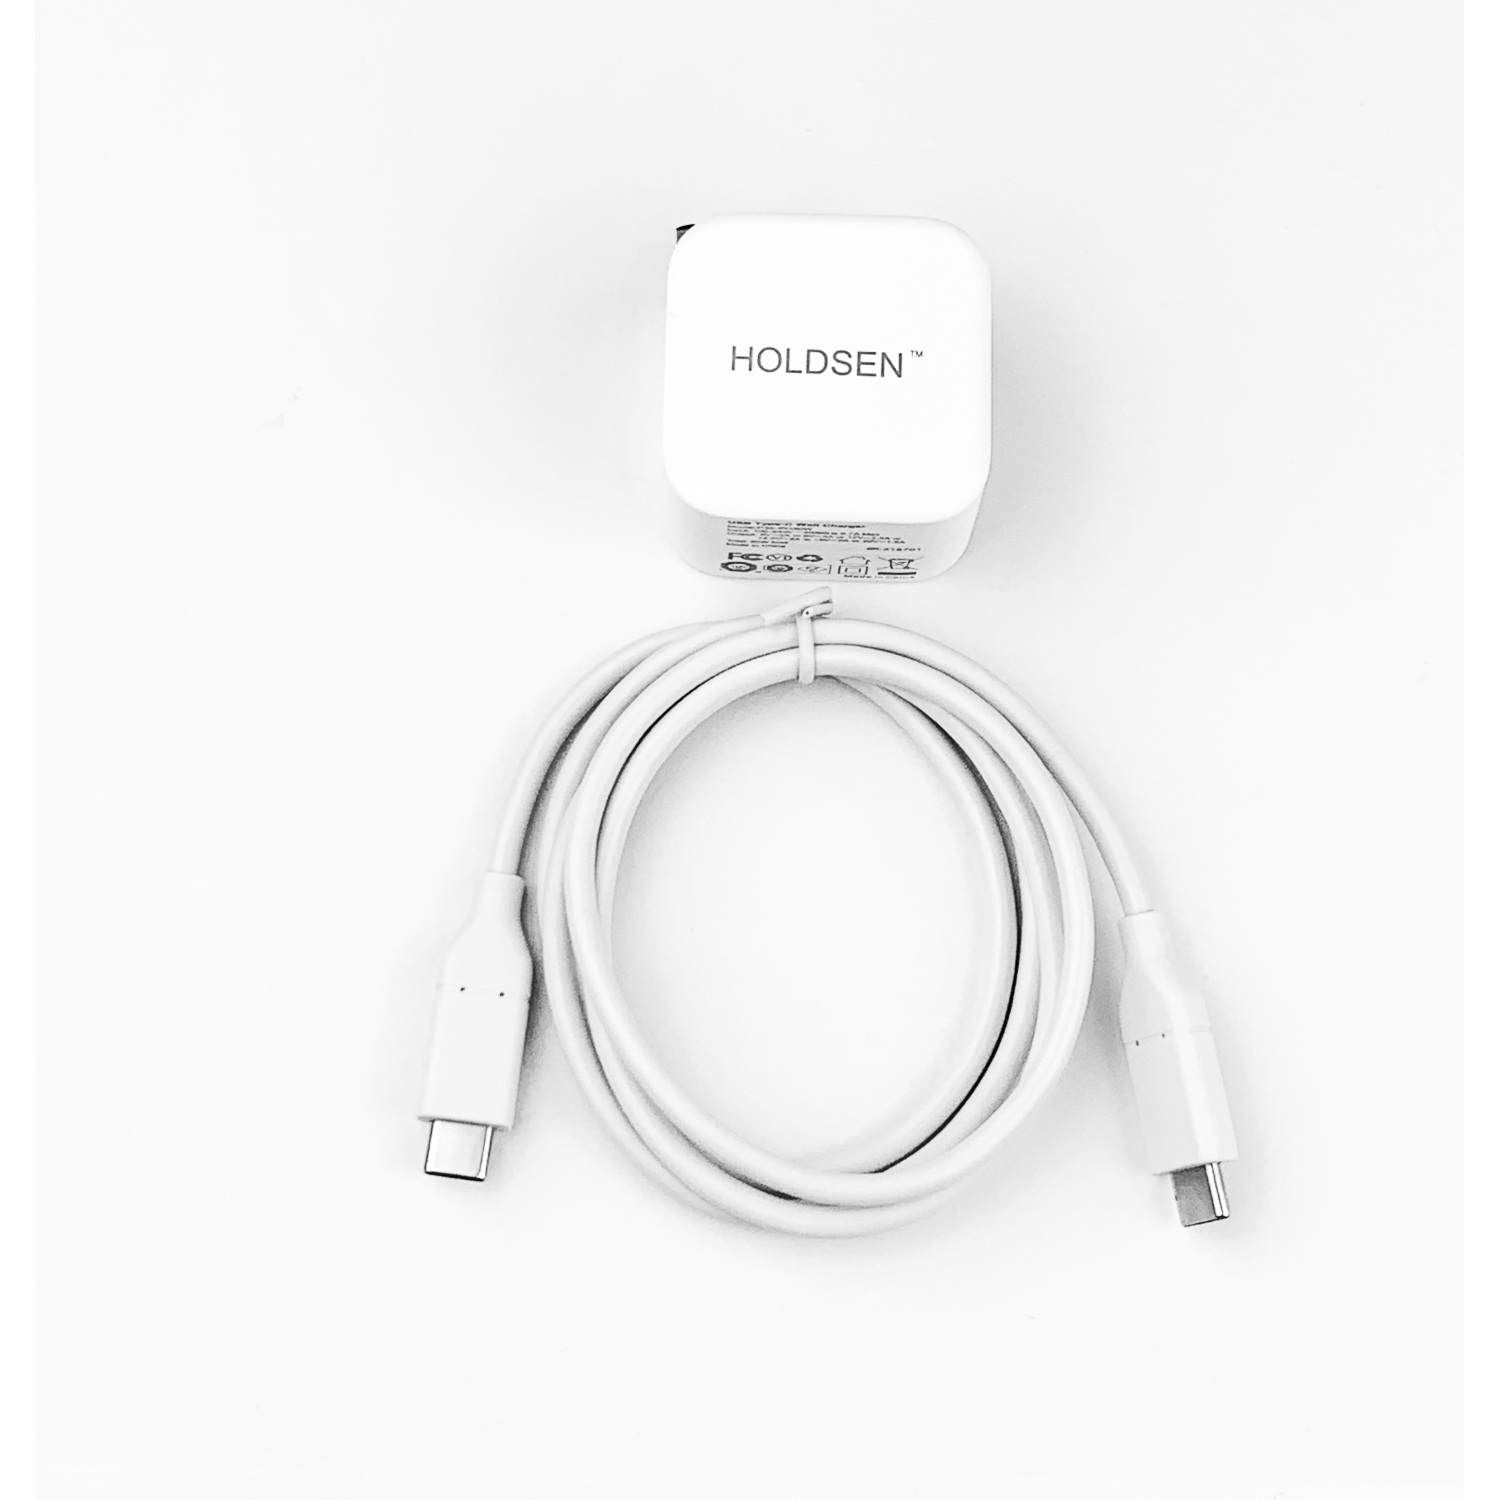 30W type C Quick charger GaN Technology PD / QC 3.0 for MacBook